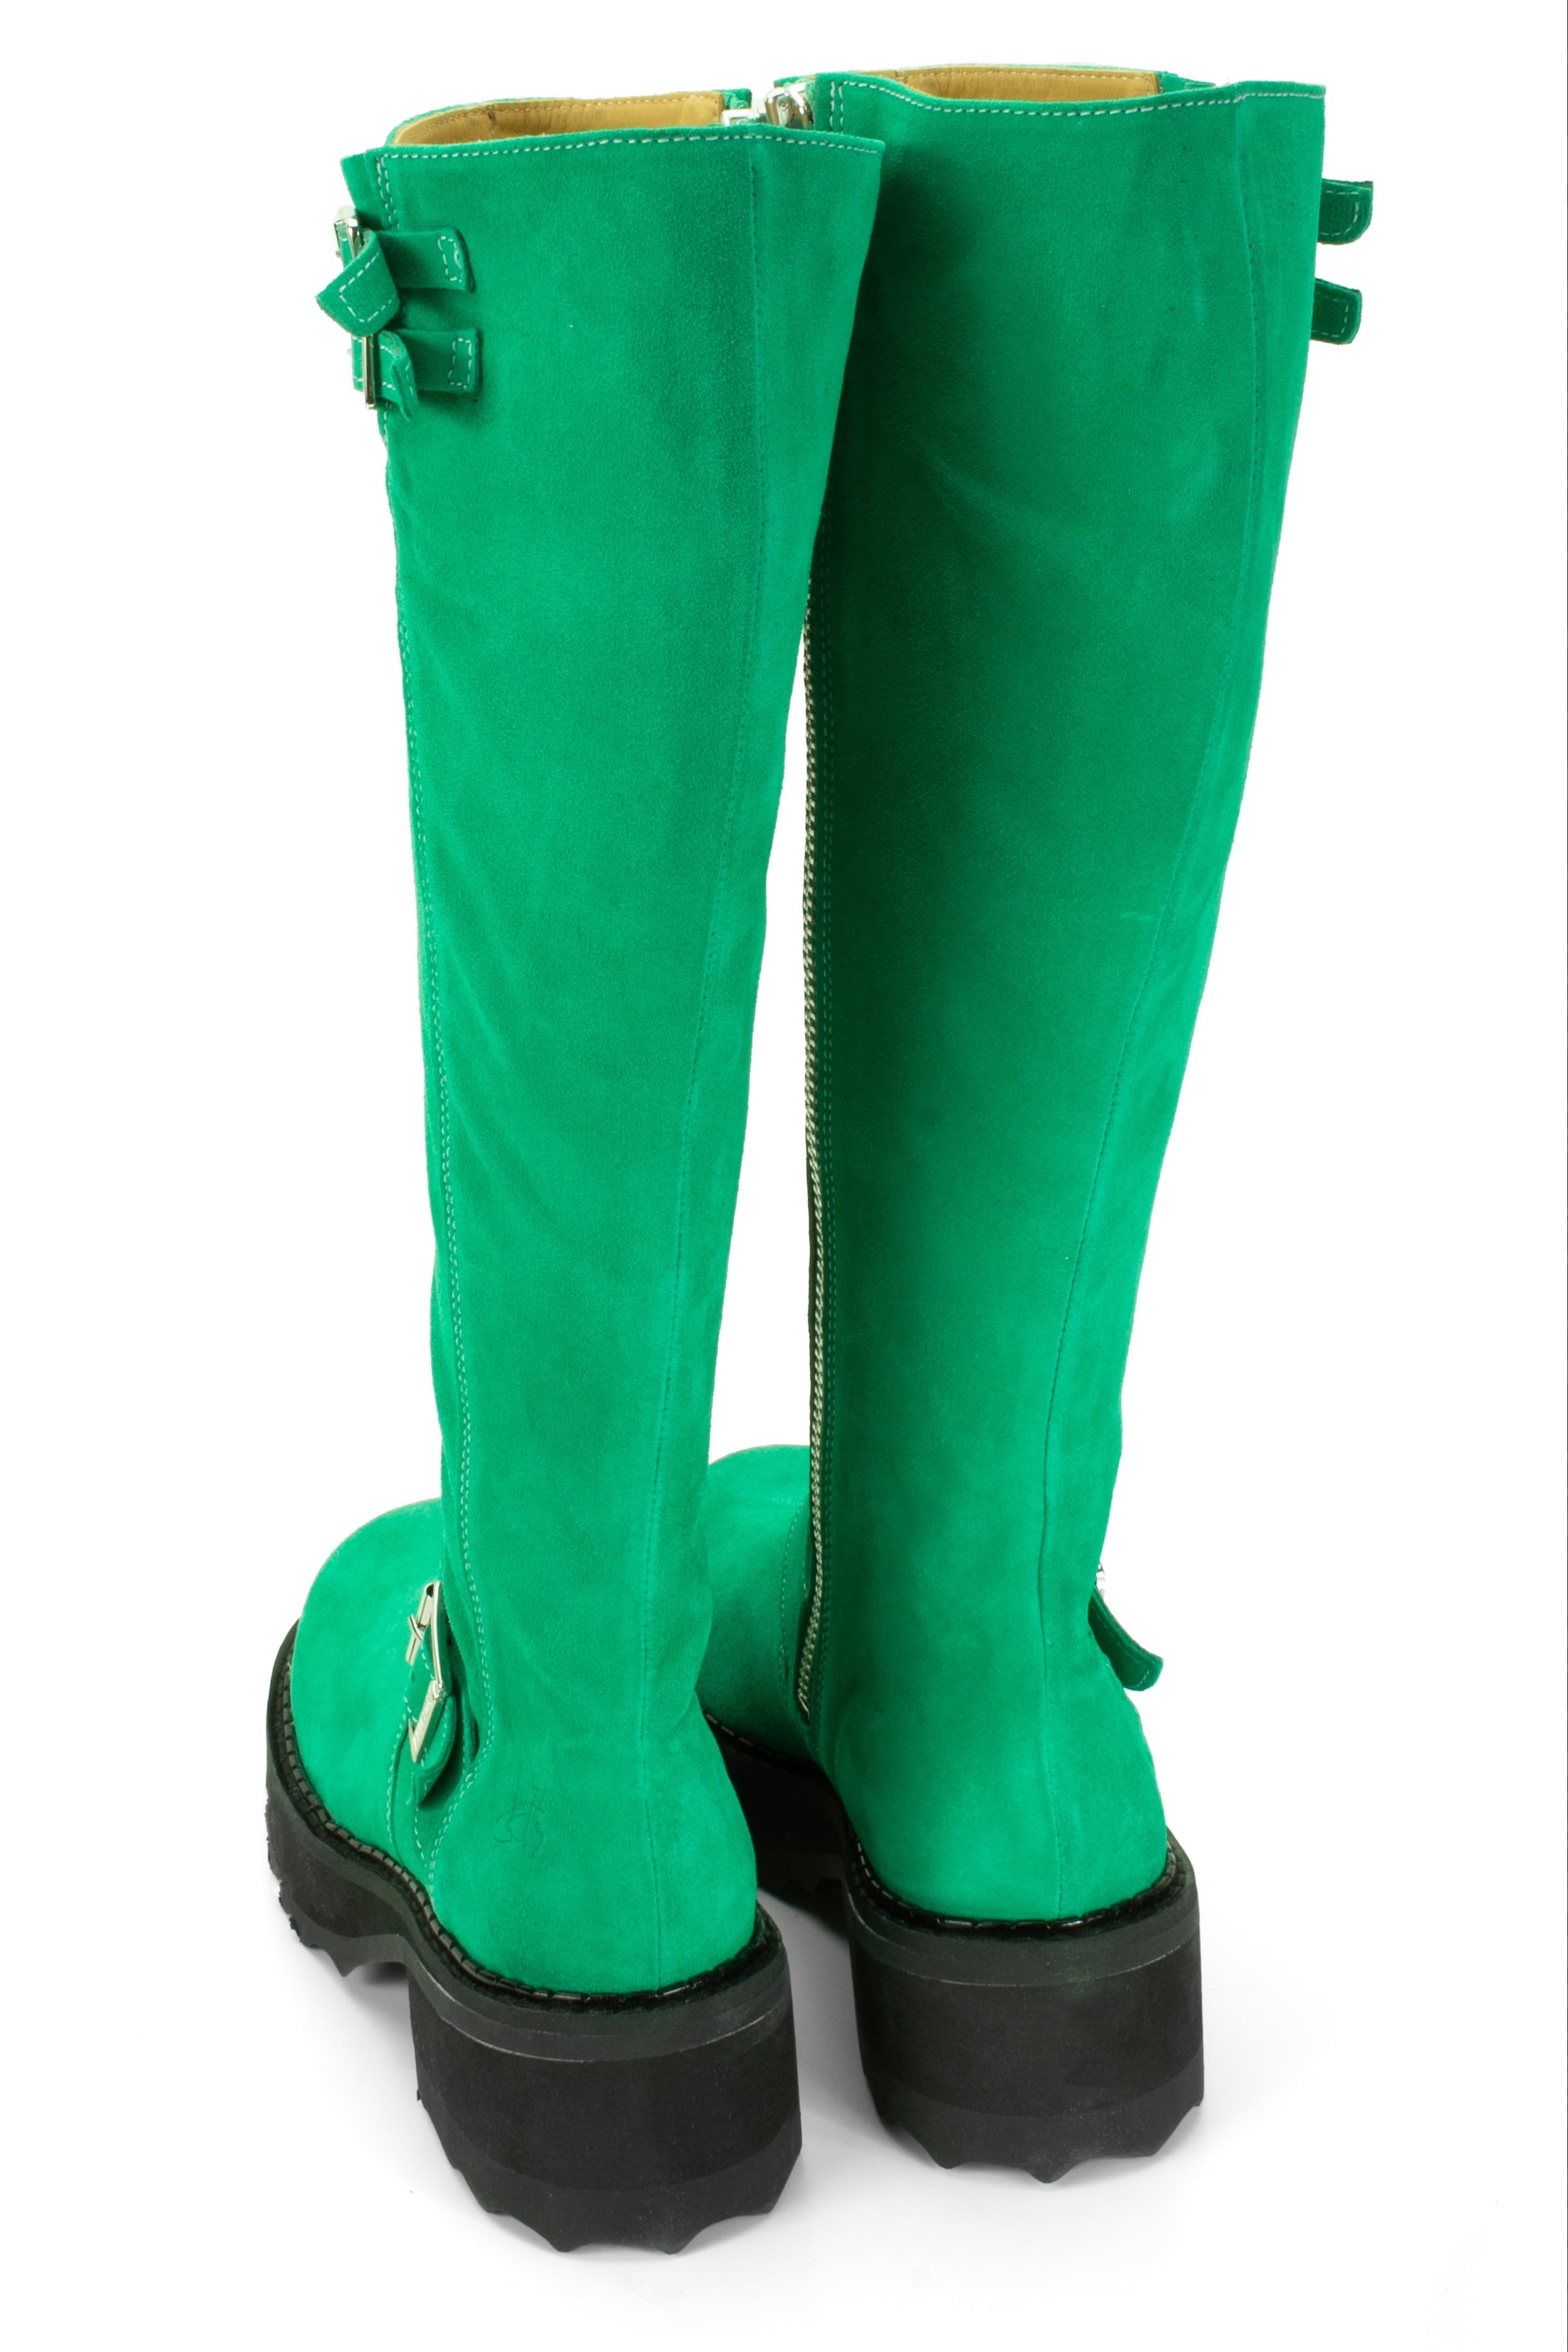 Green suede boot, 2 buckles at top, 1 on foot with large belt, heel height of 1.5"